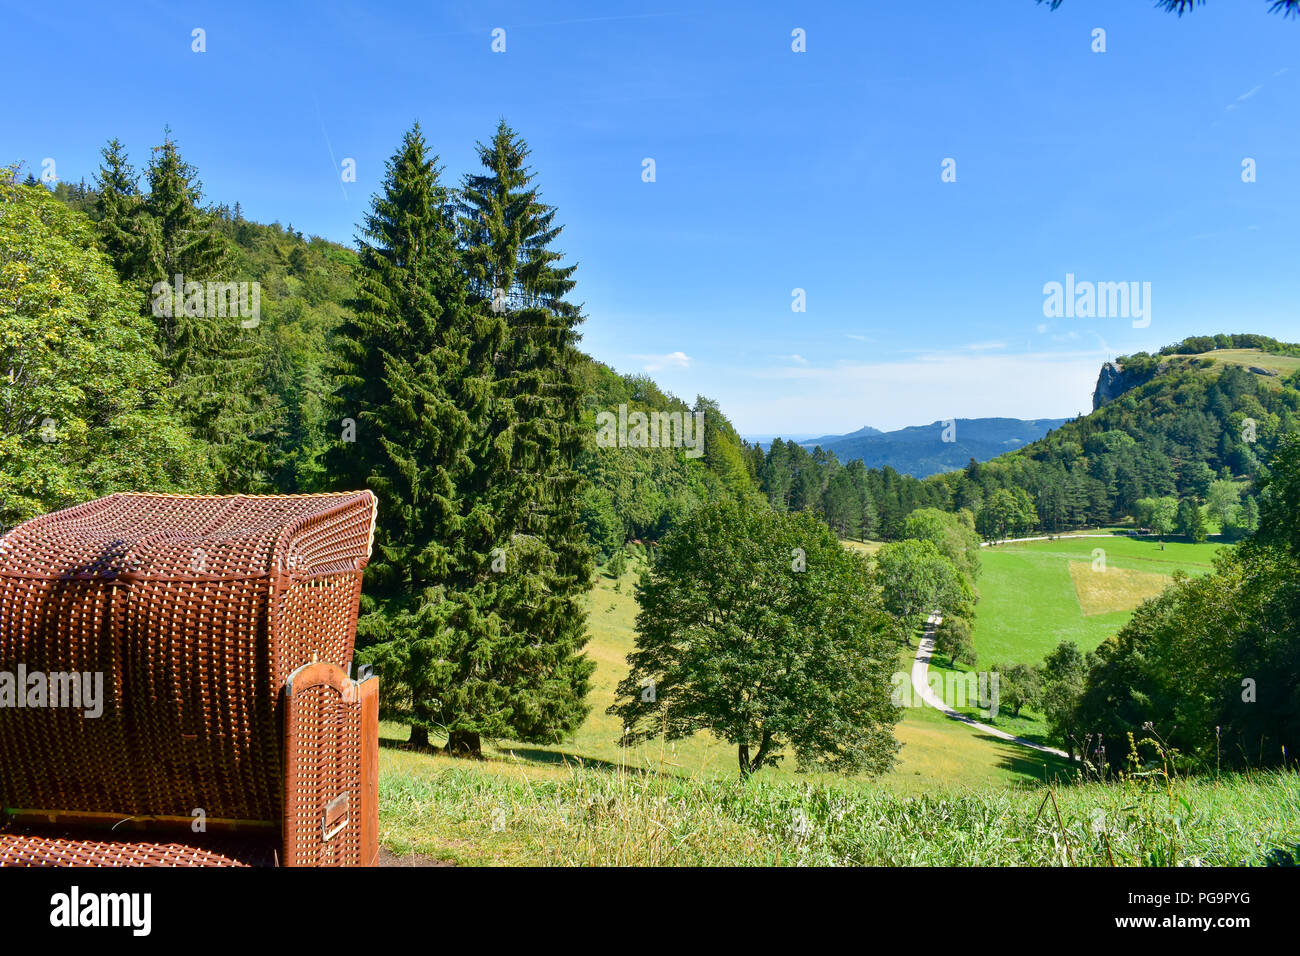 Typical Nord or Baltic sea beach chair baskets in forrest. Stock Photo